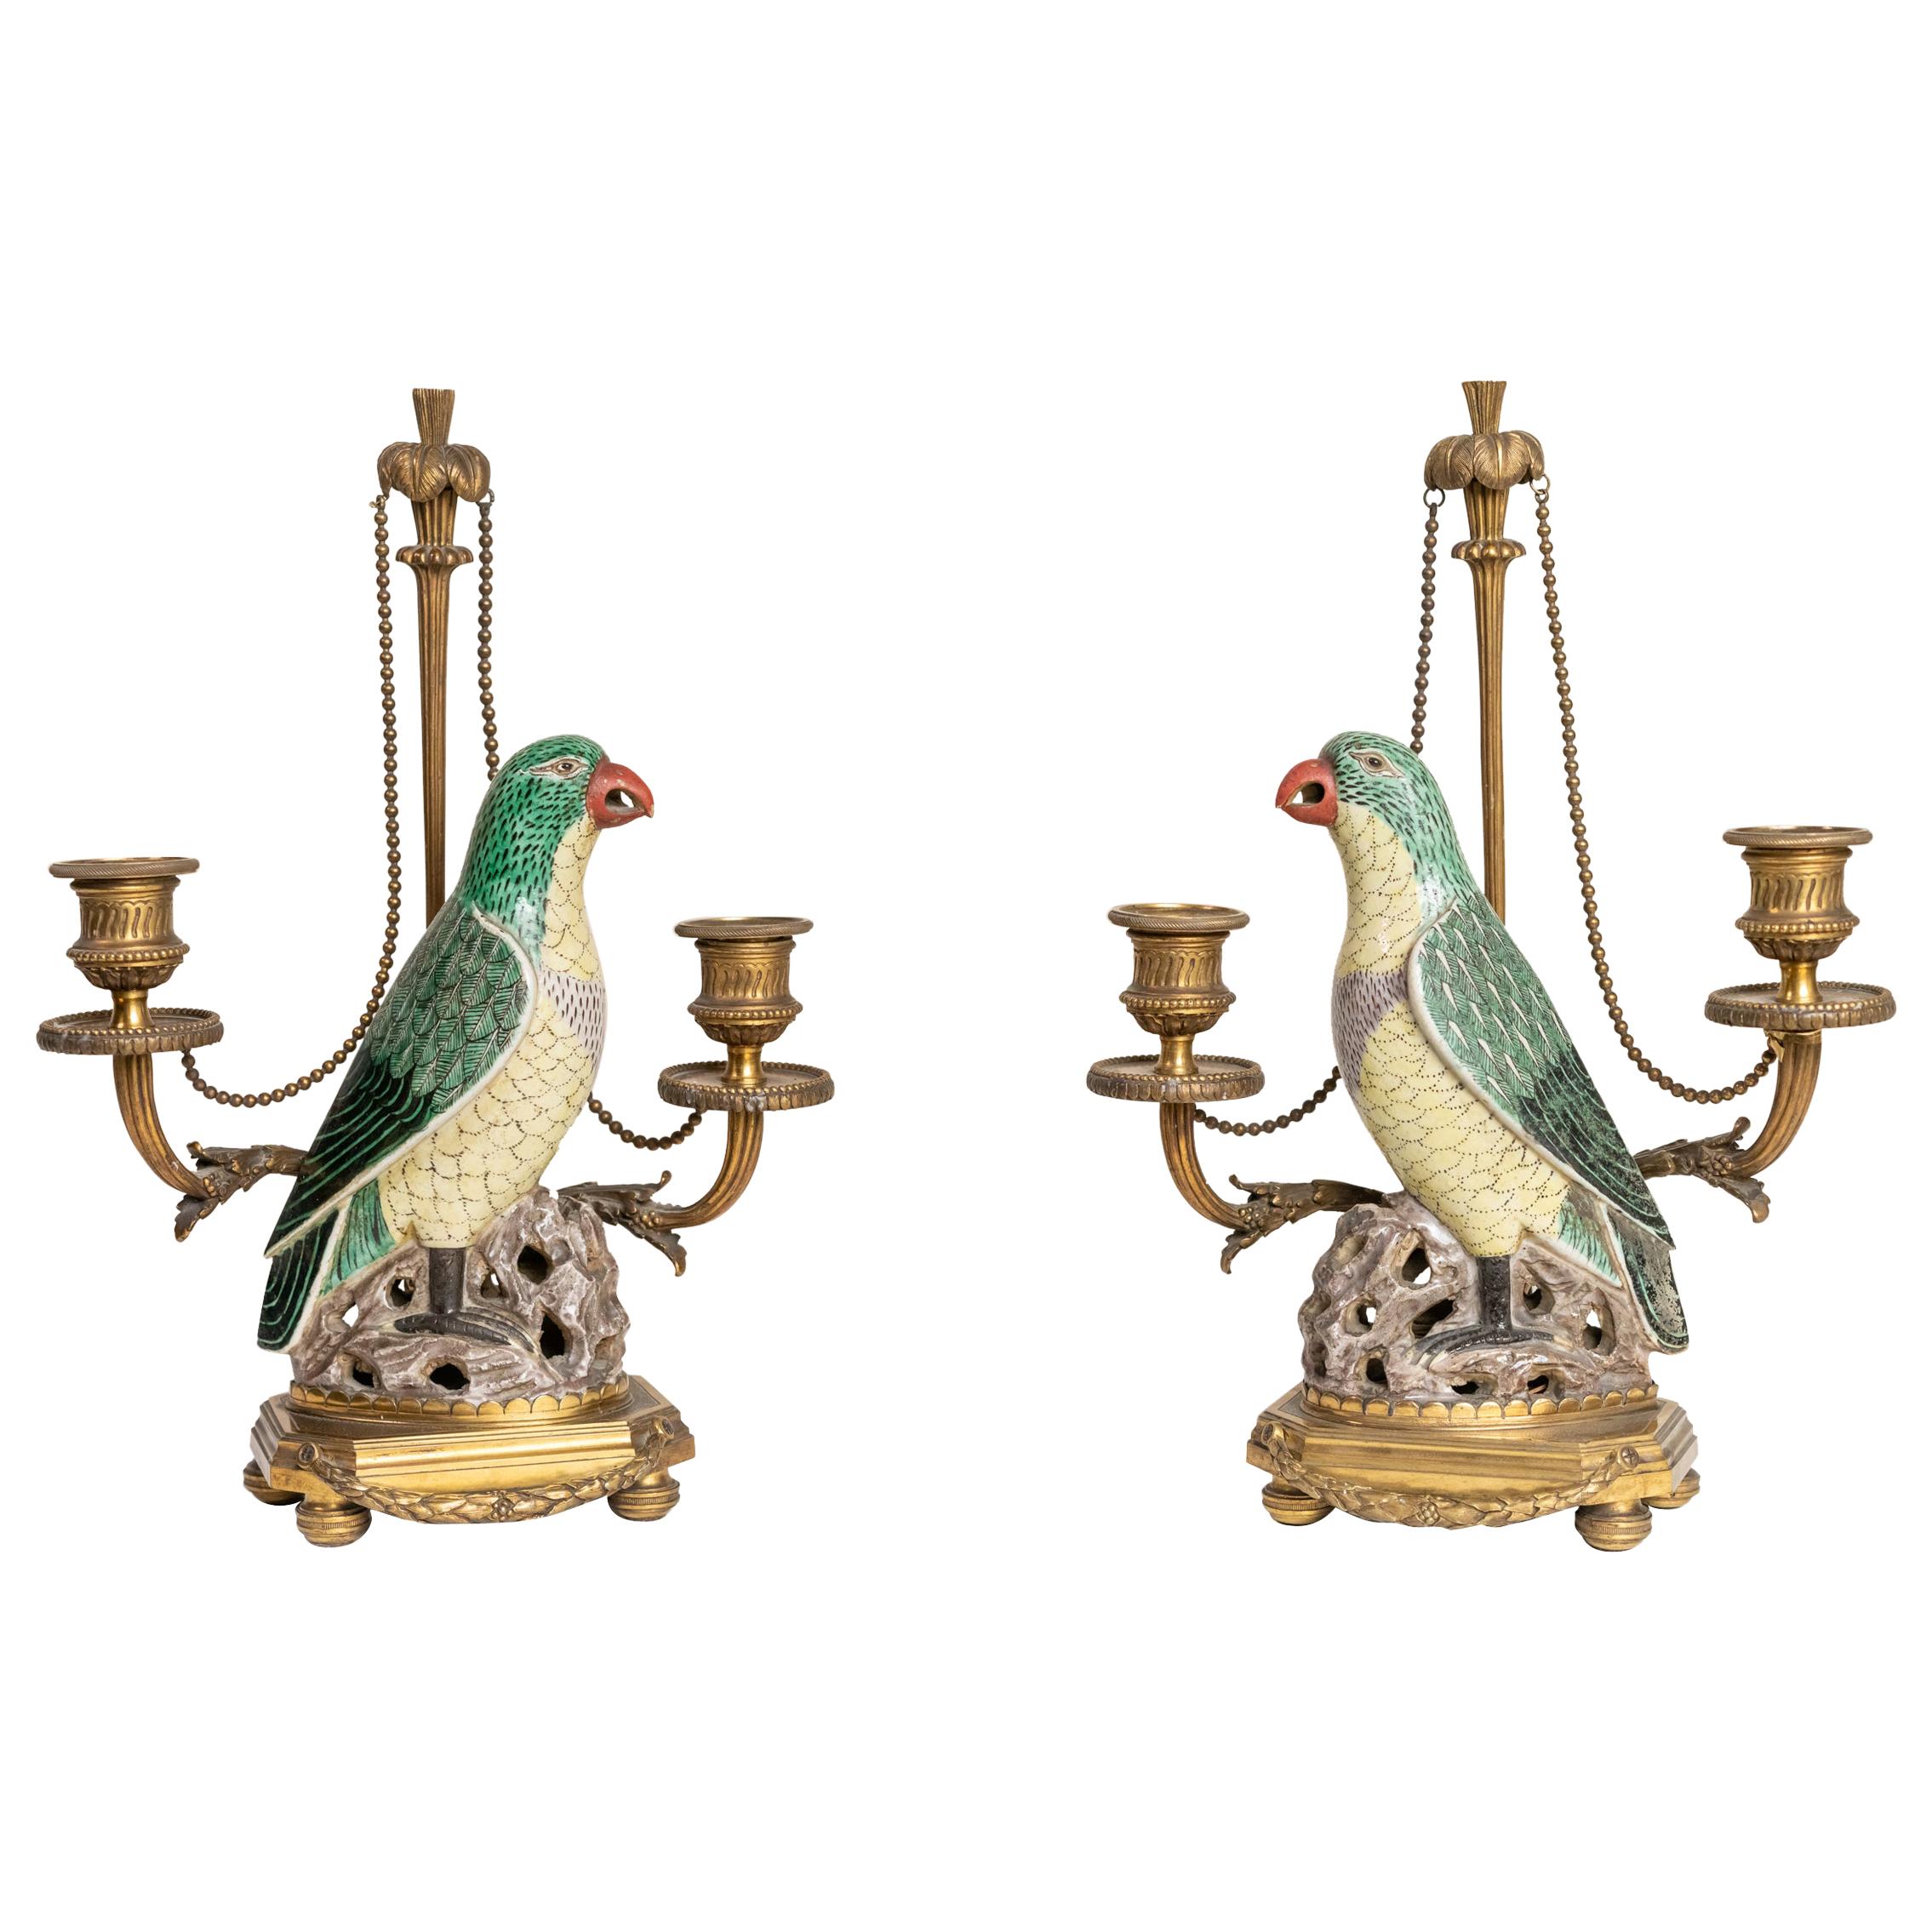 Rare Pair of 18th Century-19th Century Chinese Porcelain Parrots Candelabra For Sale